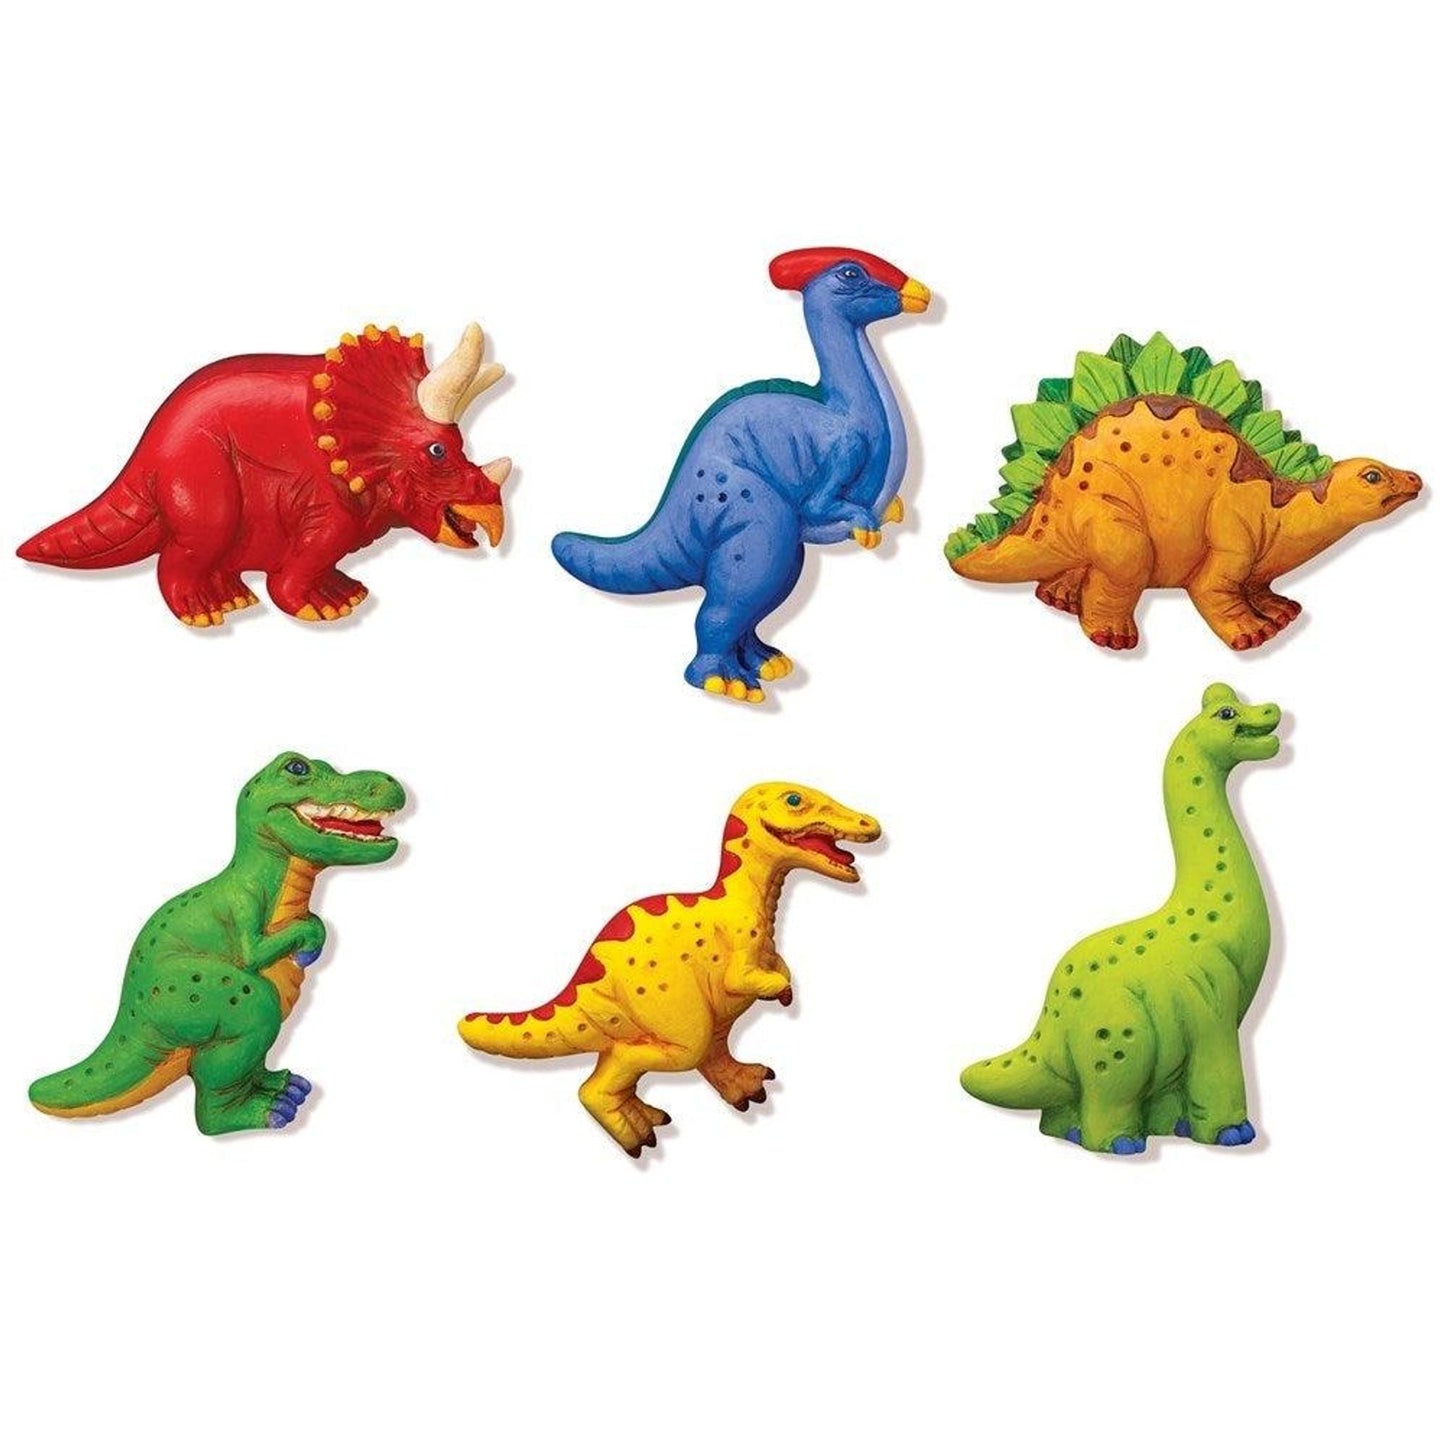 Mould & Paint: Dinosaurs - Toybox Tales